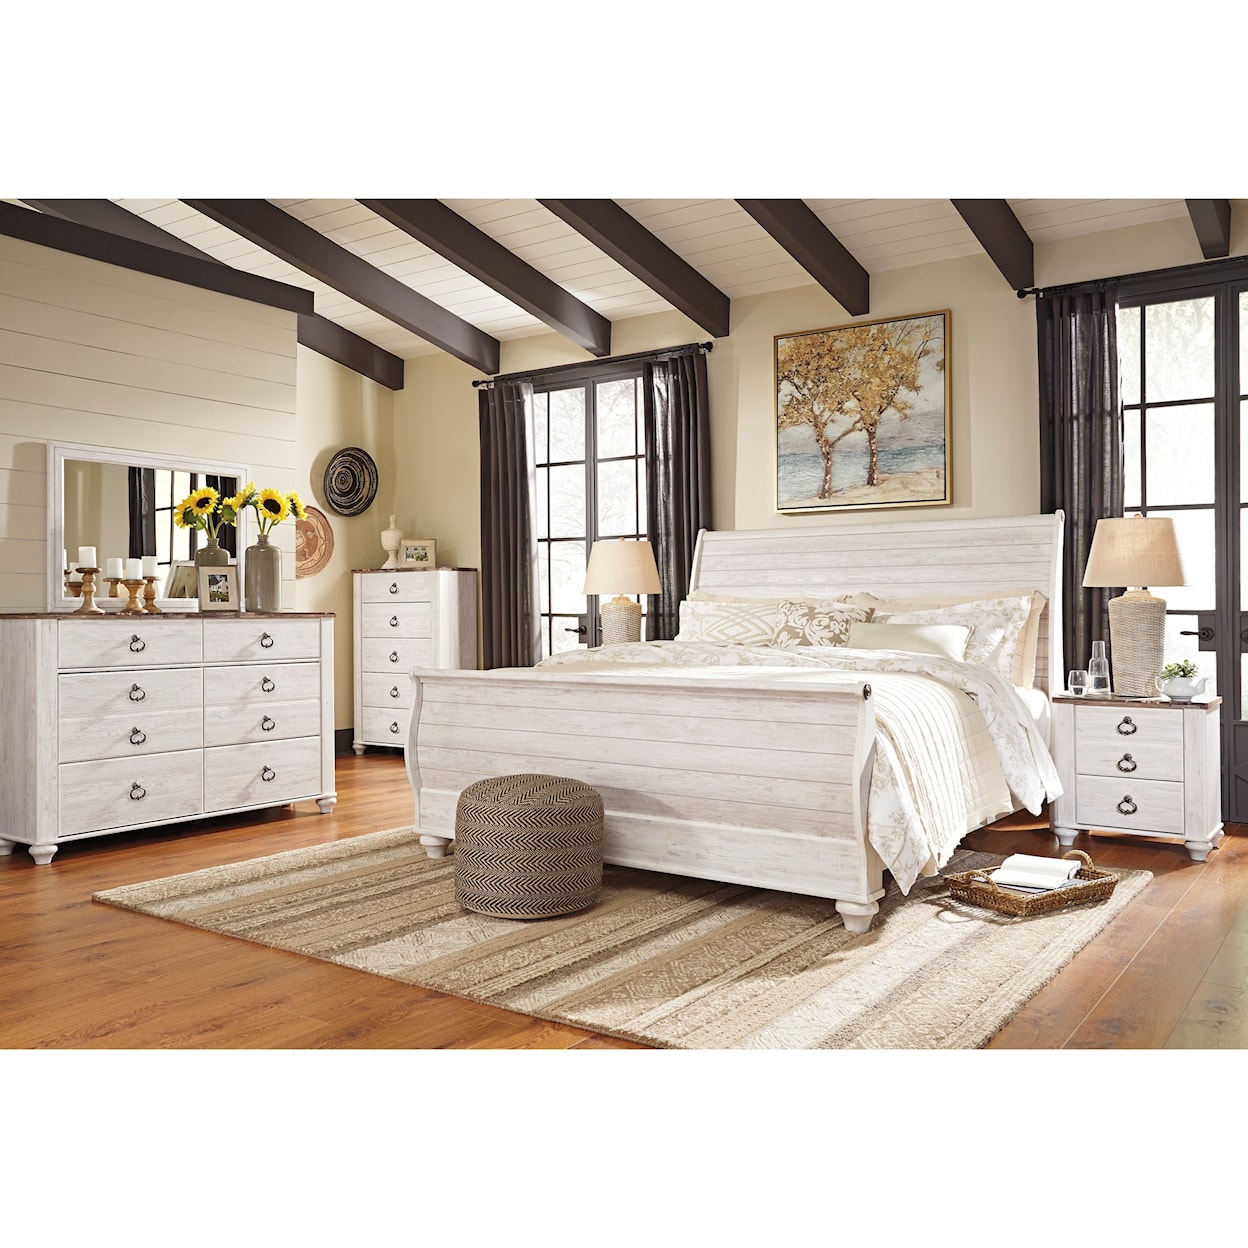 Ashley Signature Design Willowton King Bedroom Group